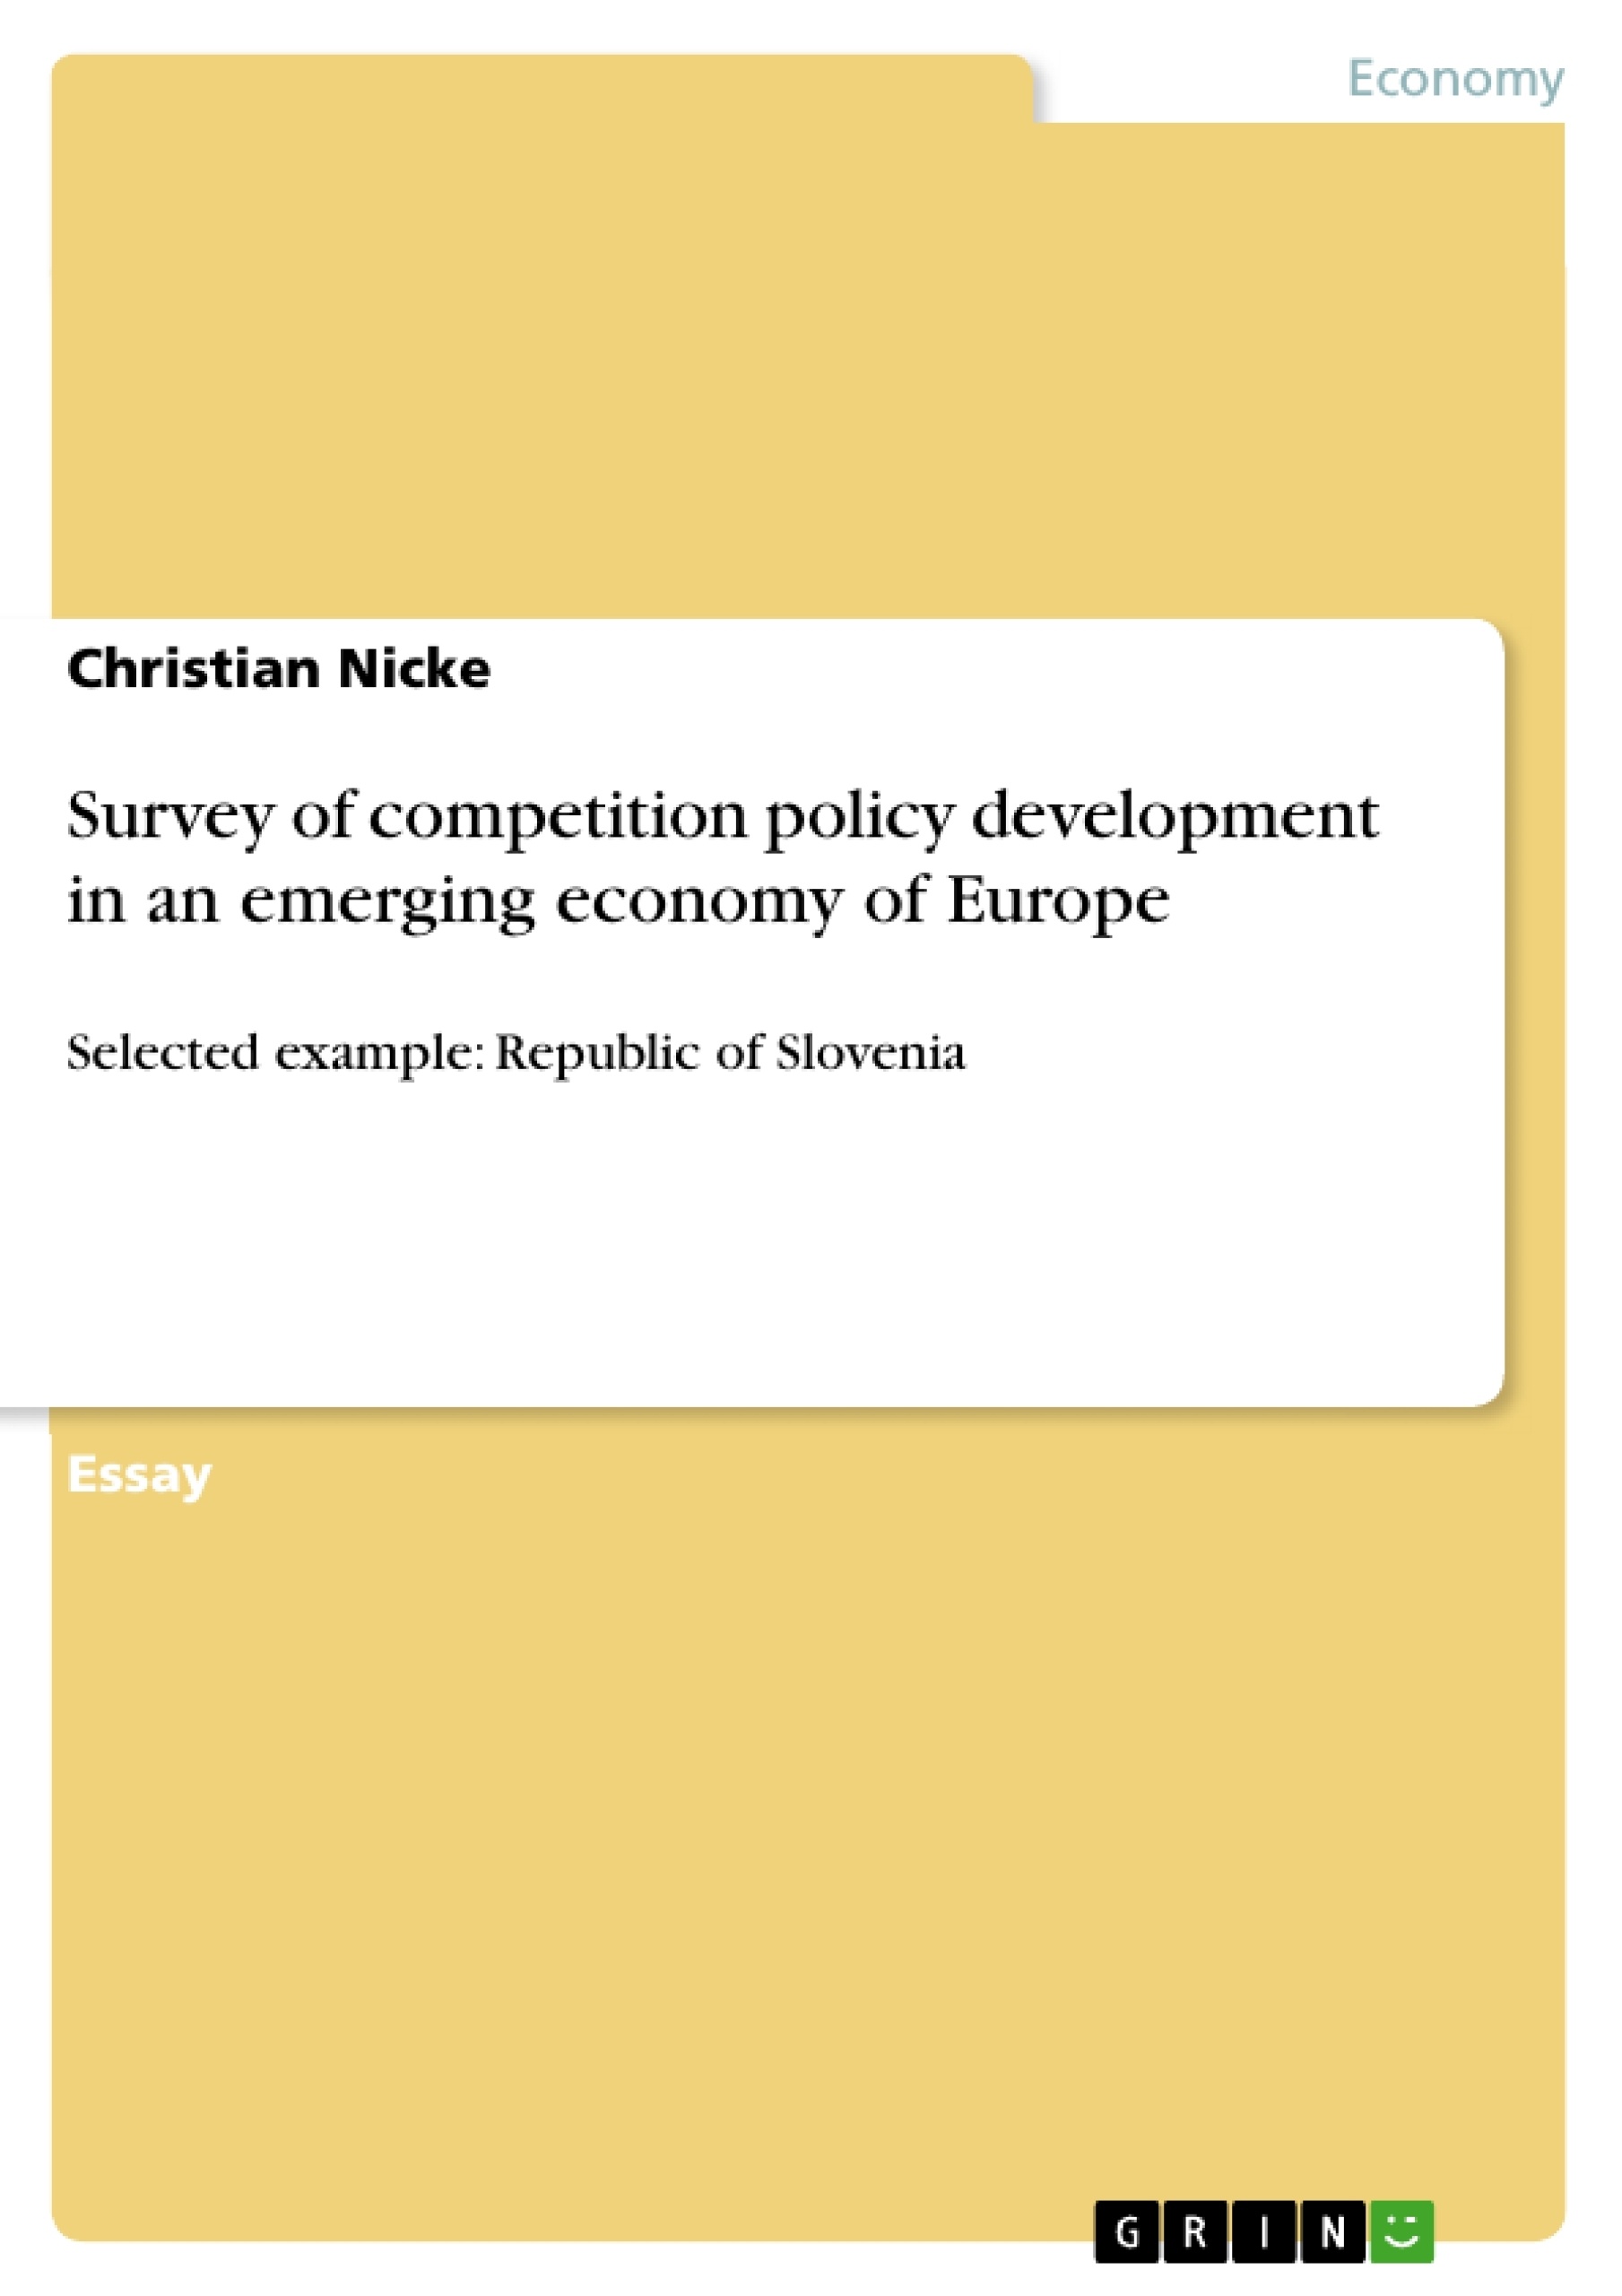 Title: Survey of competition policy development in an emerging economy of Europe